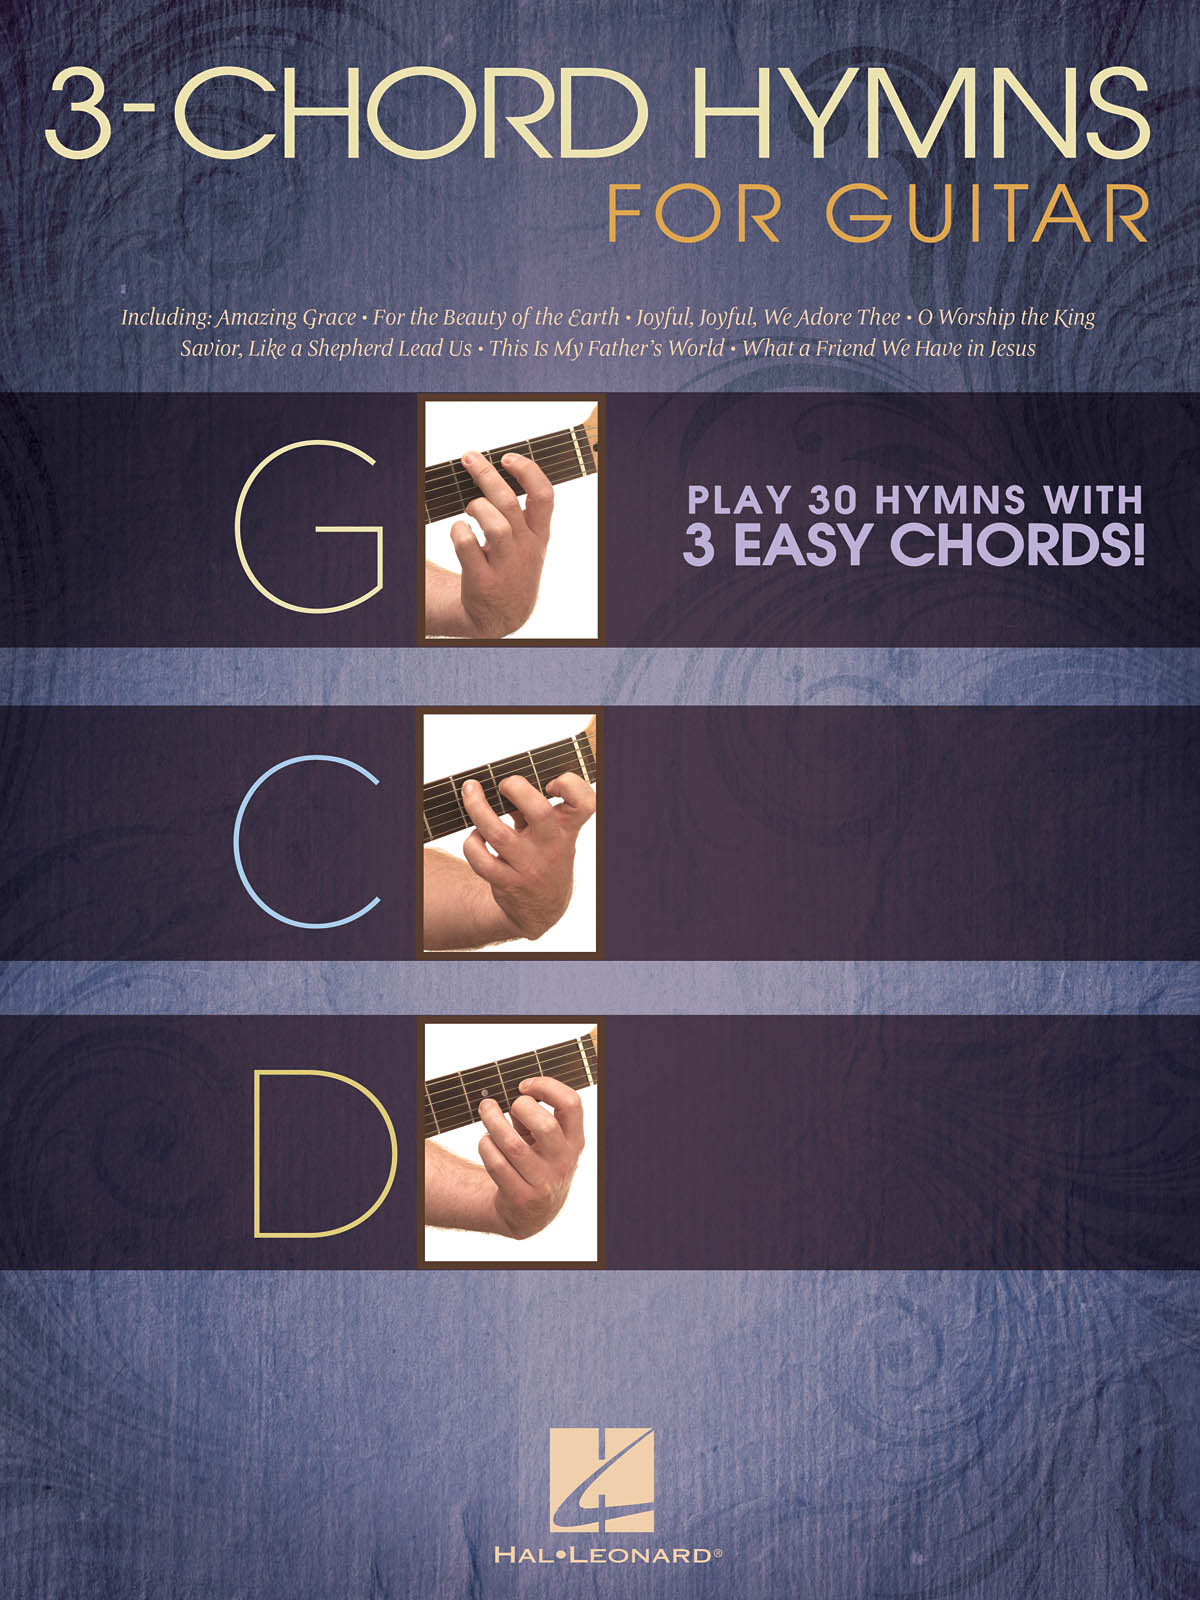 3-Chord Hymns For Guitar - Play 30 Hymns With 3 Easy Chords - noty na kytaru